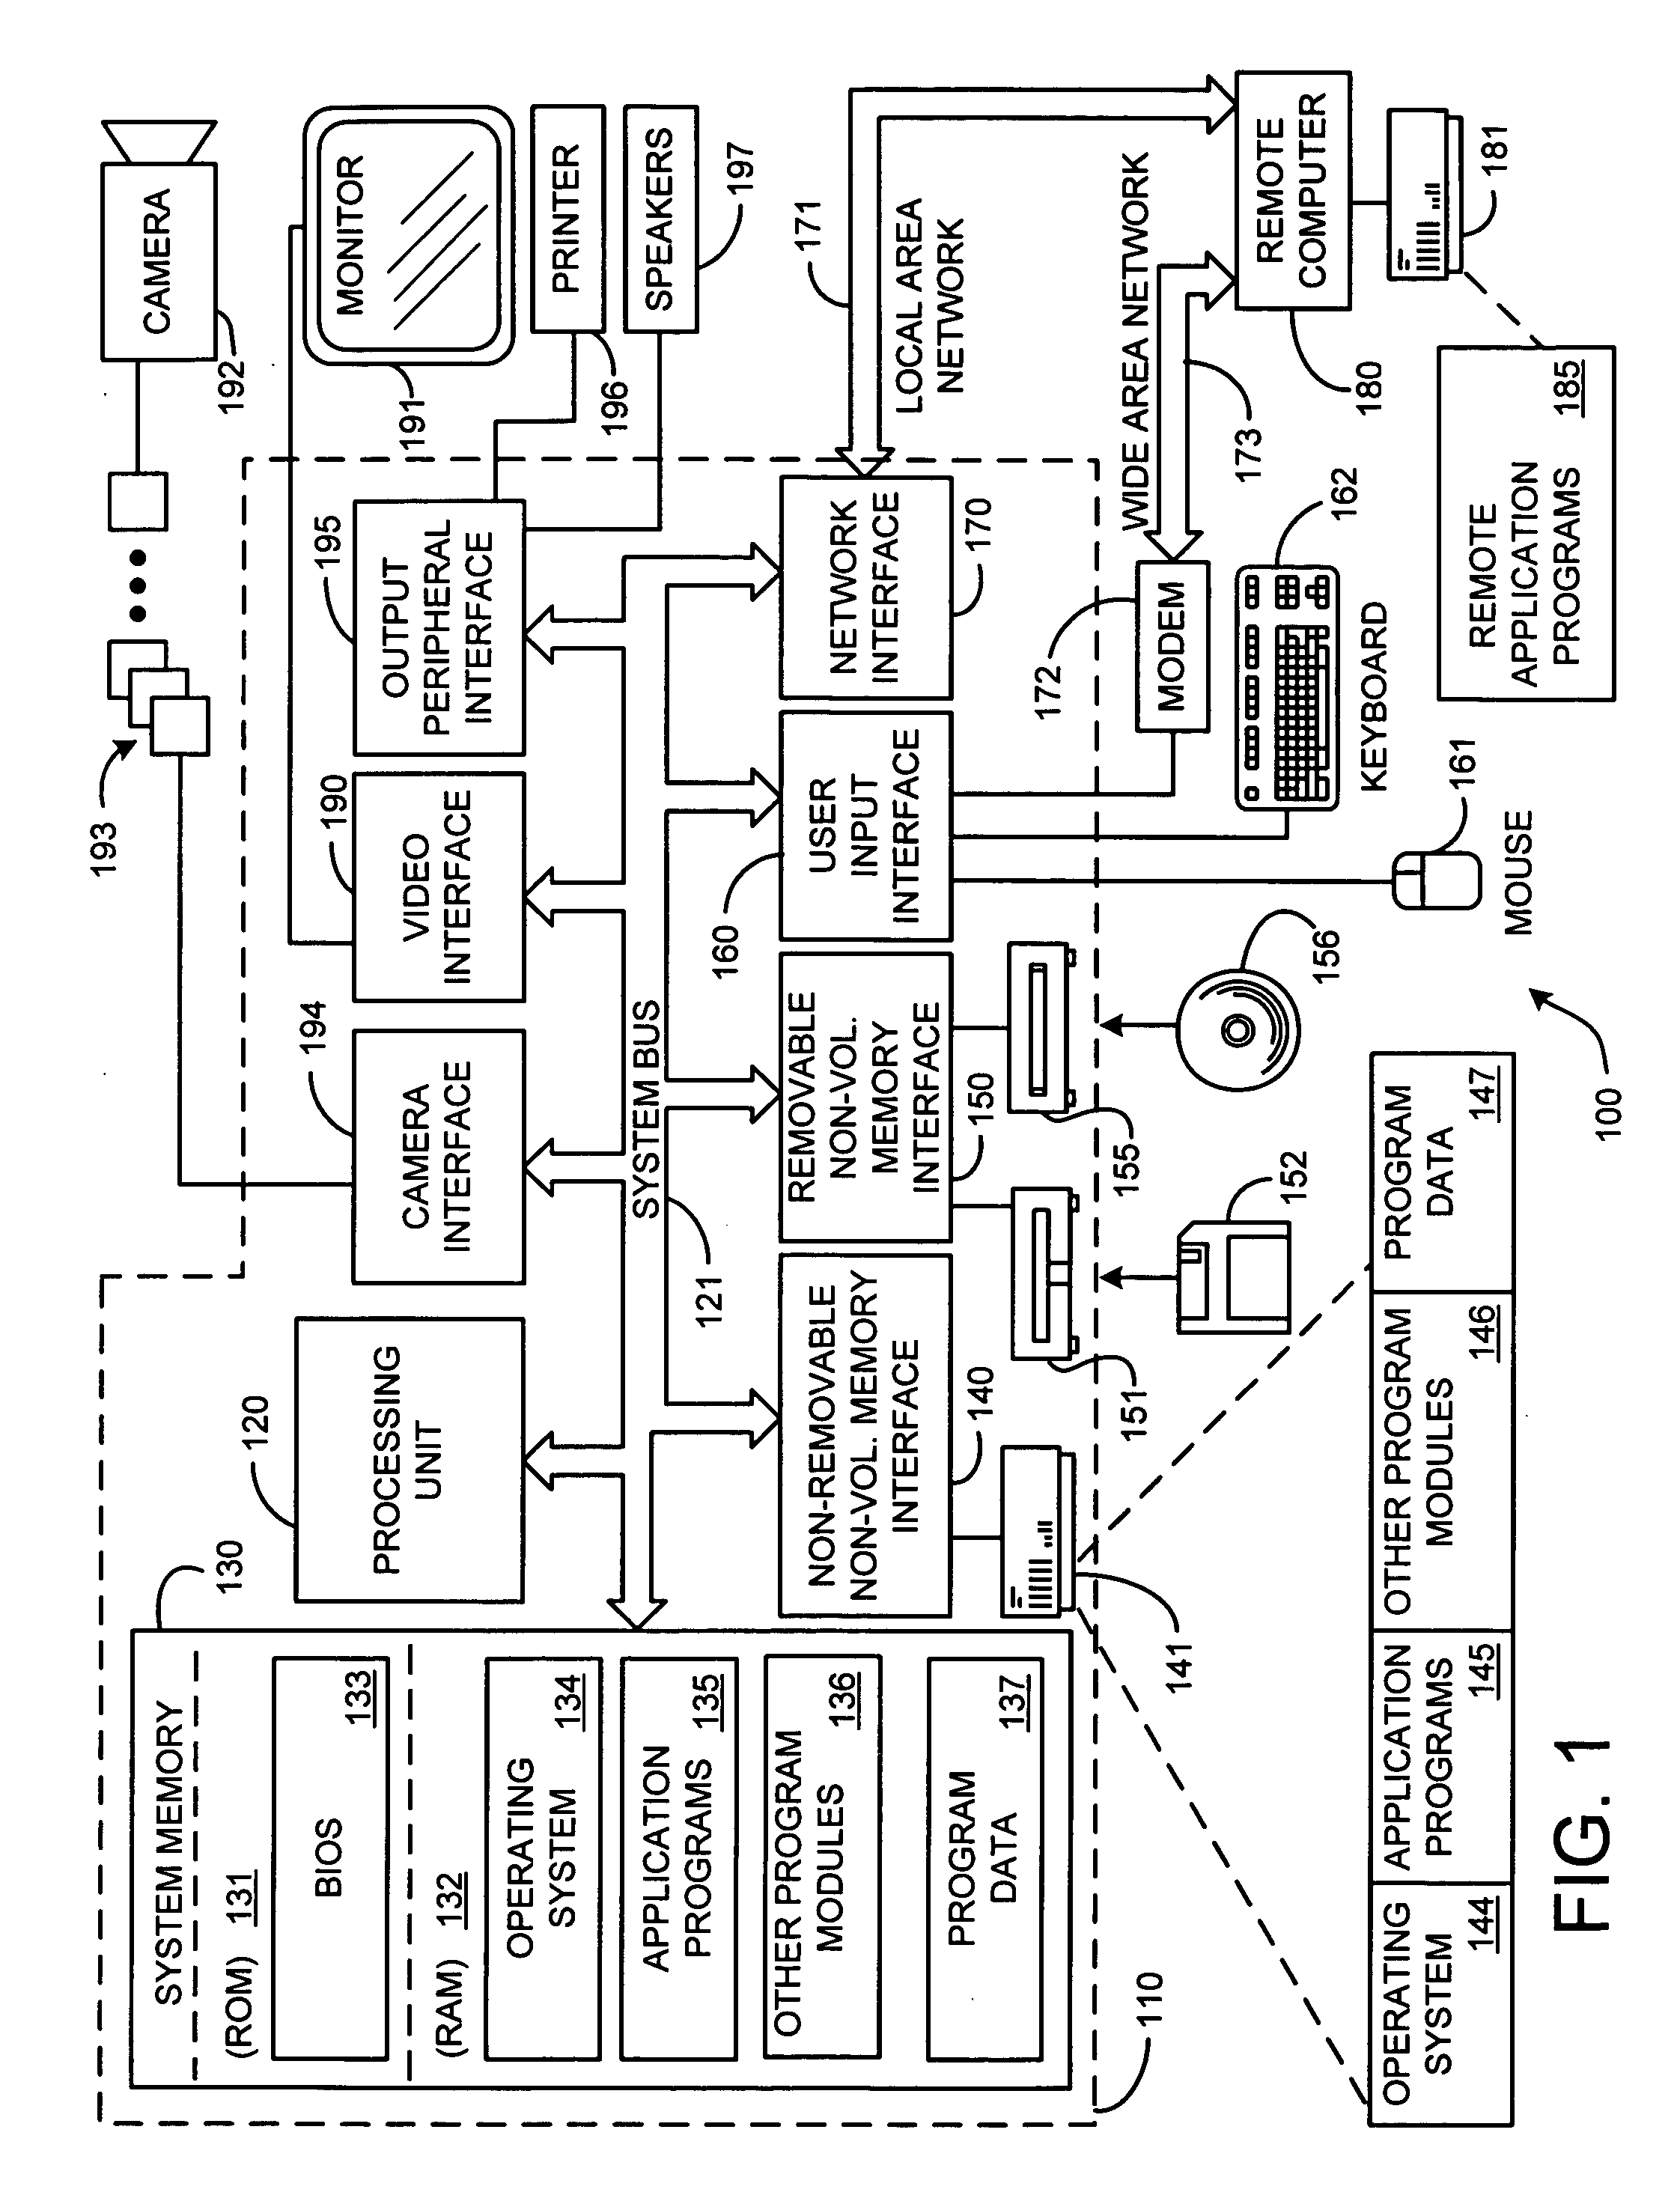 System and process for performing an exponentially weighted moving average on streaming data to establish a moving average bit rate